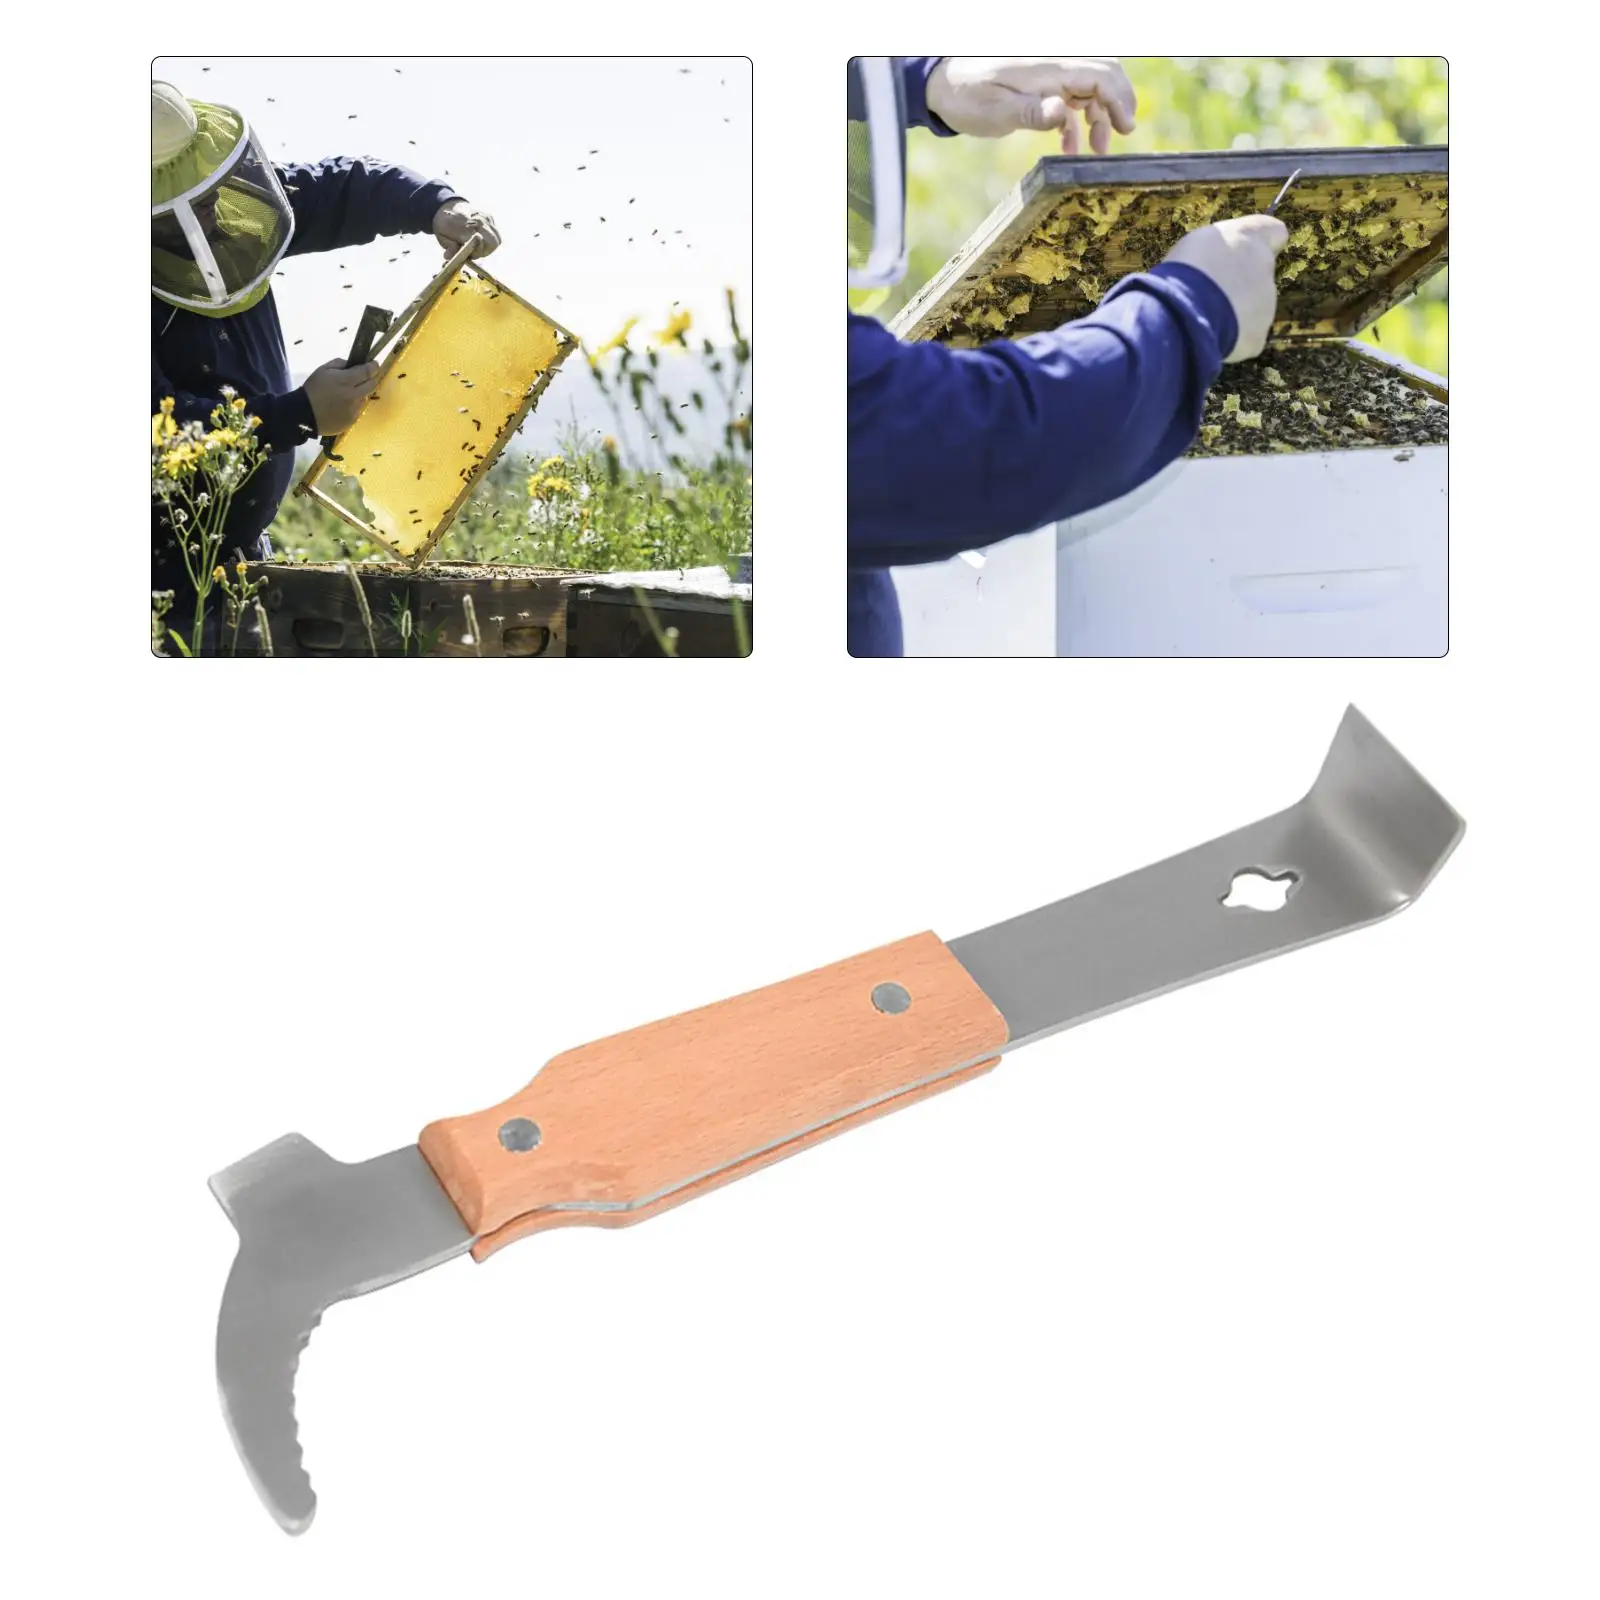 Bee  Scraper Bee  Hook Scraper   Bee Scraper Bee  Lifter for Apiculture Uncapping Beekeeping Equipment